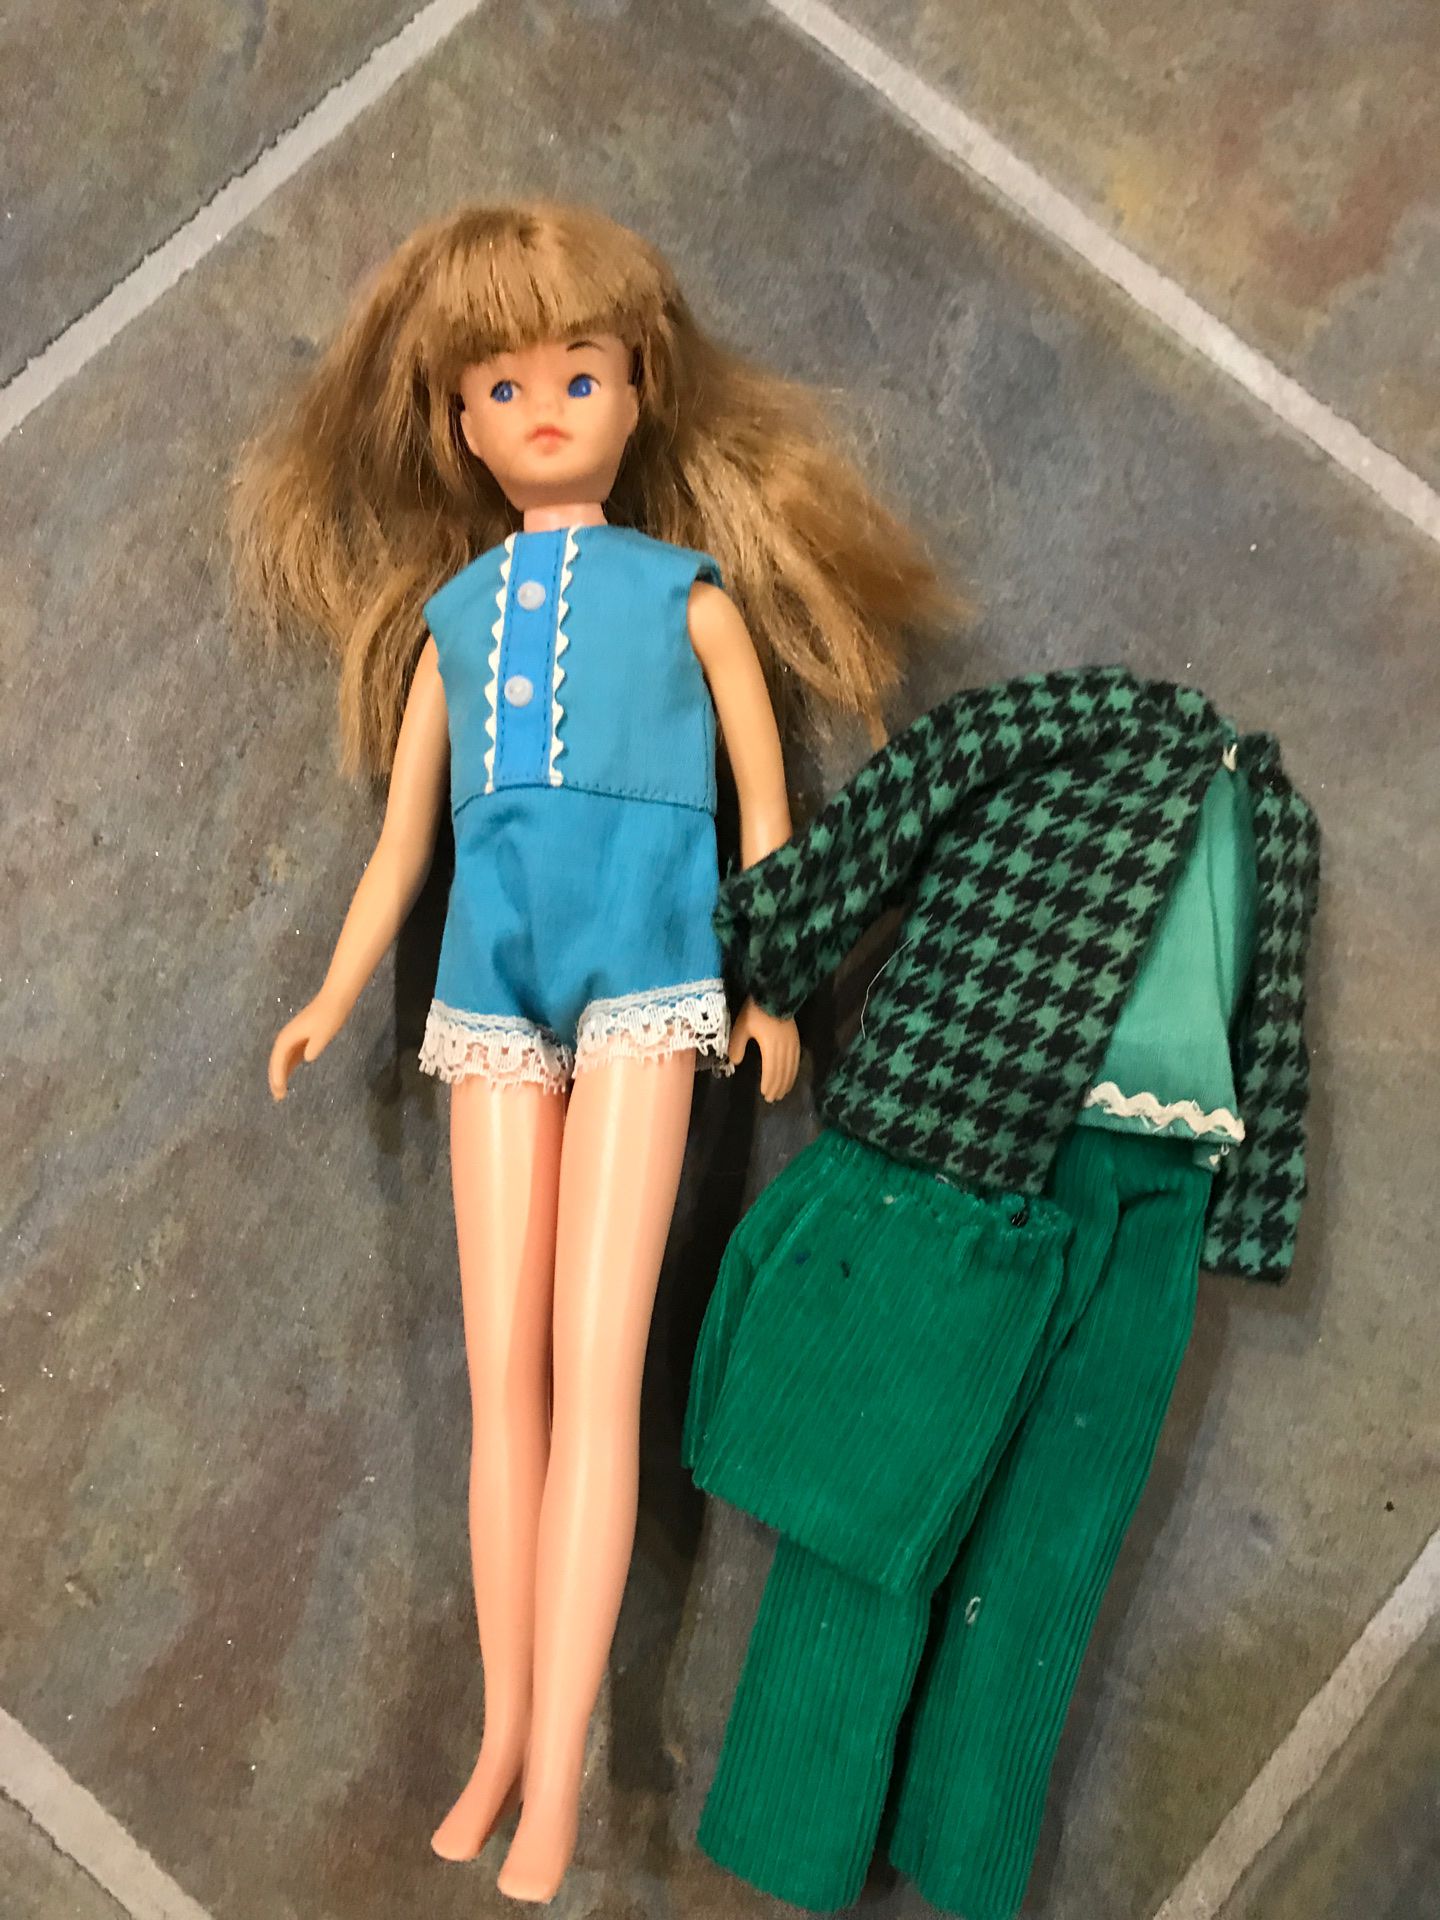 Pepper 1960 doll and outfit